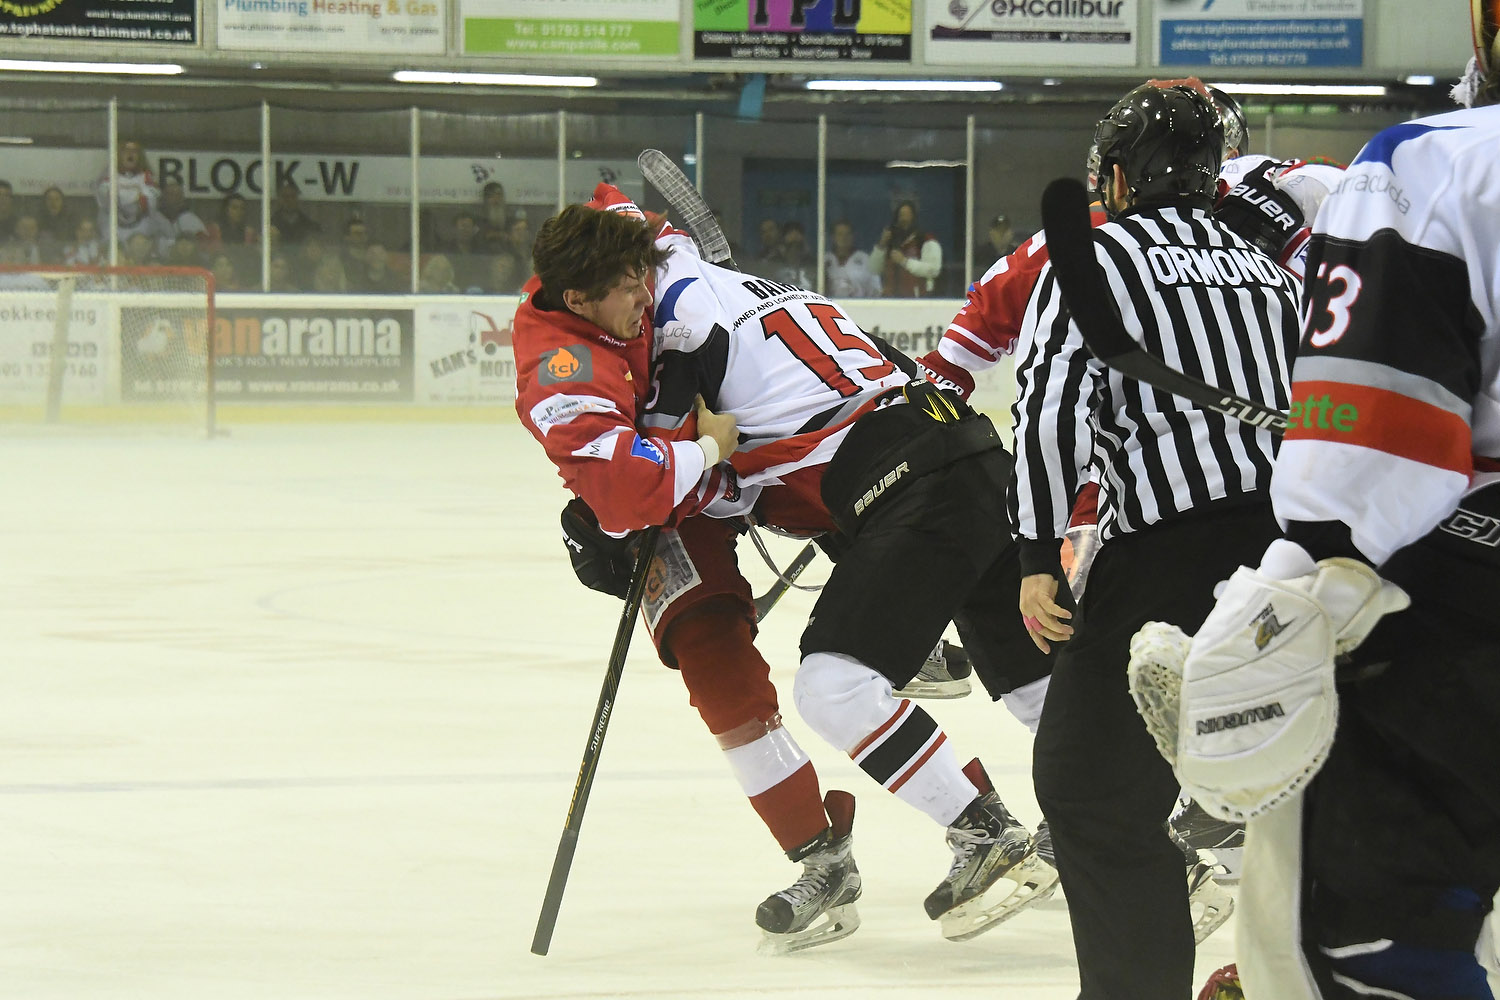 Oliver Stone remains with the Swindon Wildcats for another year